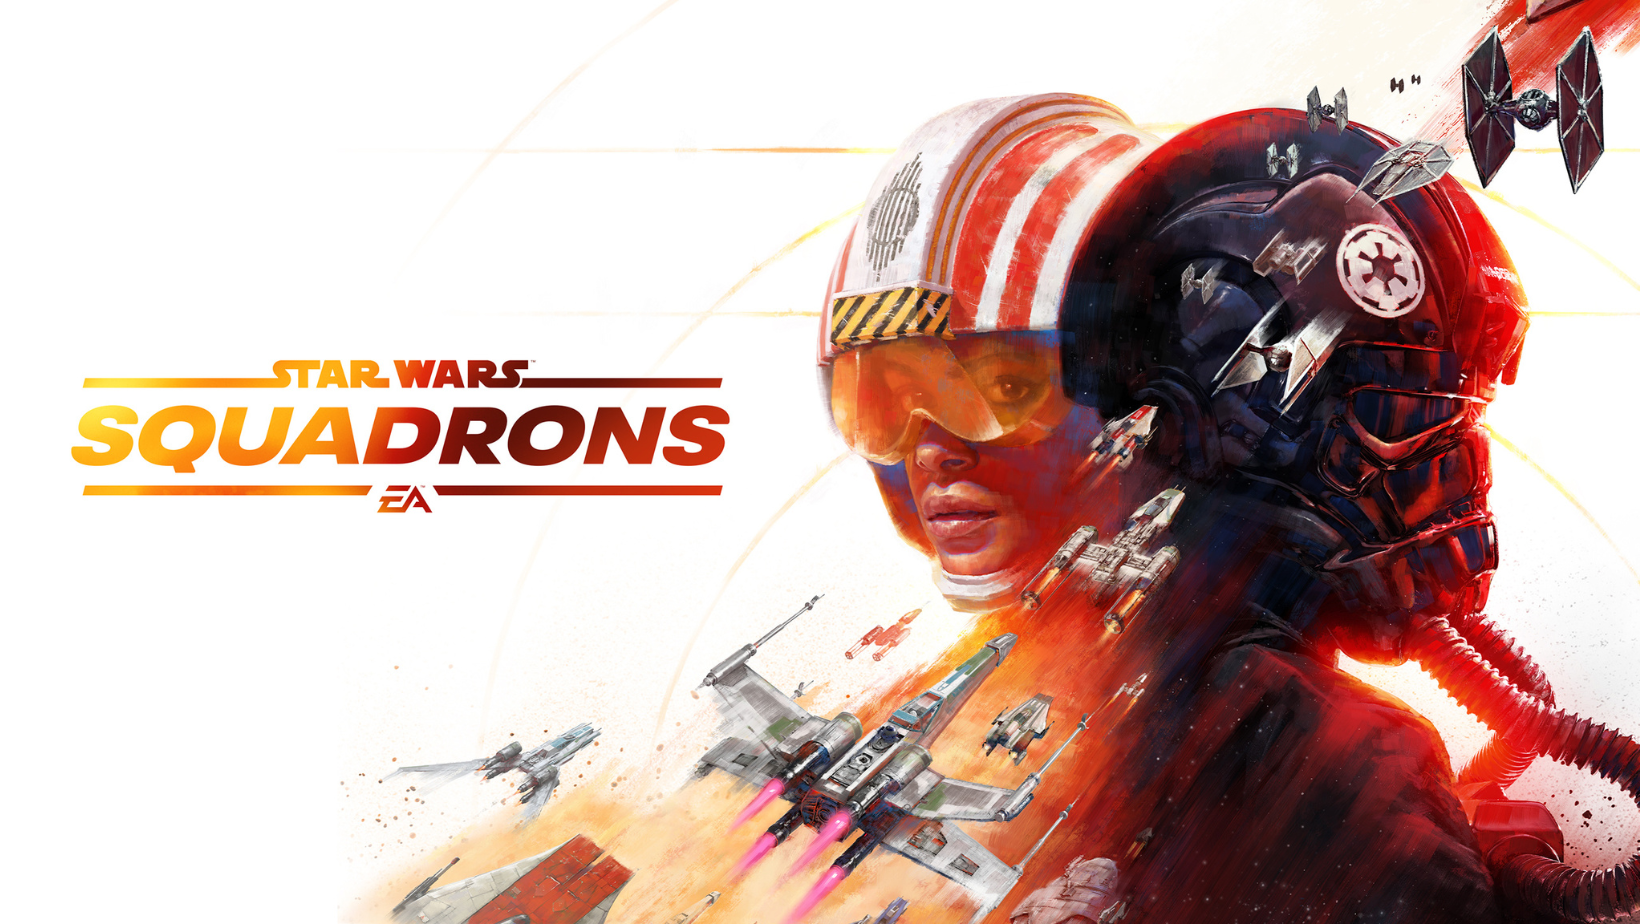 Star Wars: Squadrons and Virtua Fighter 5 Coming to PlayStation Plus